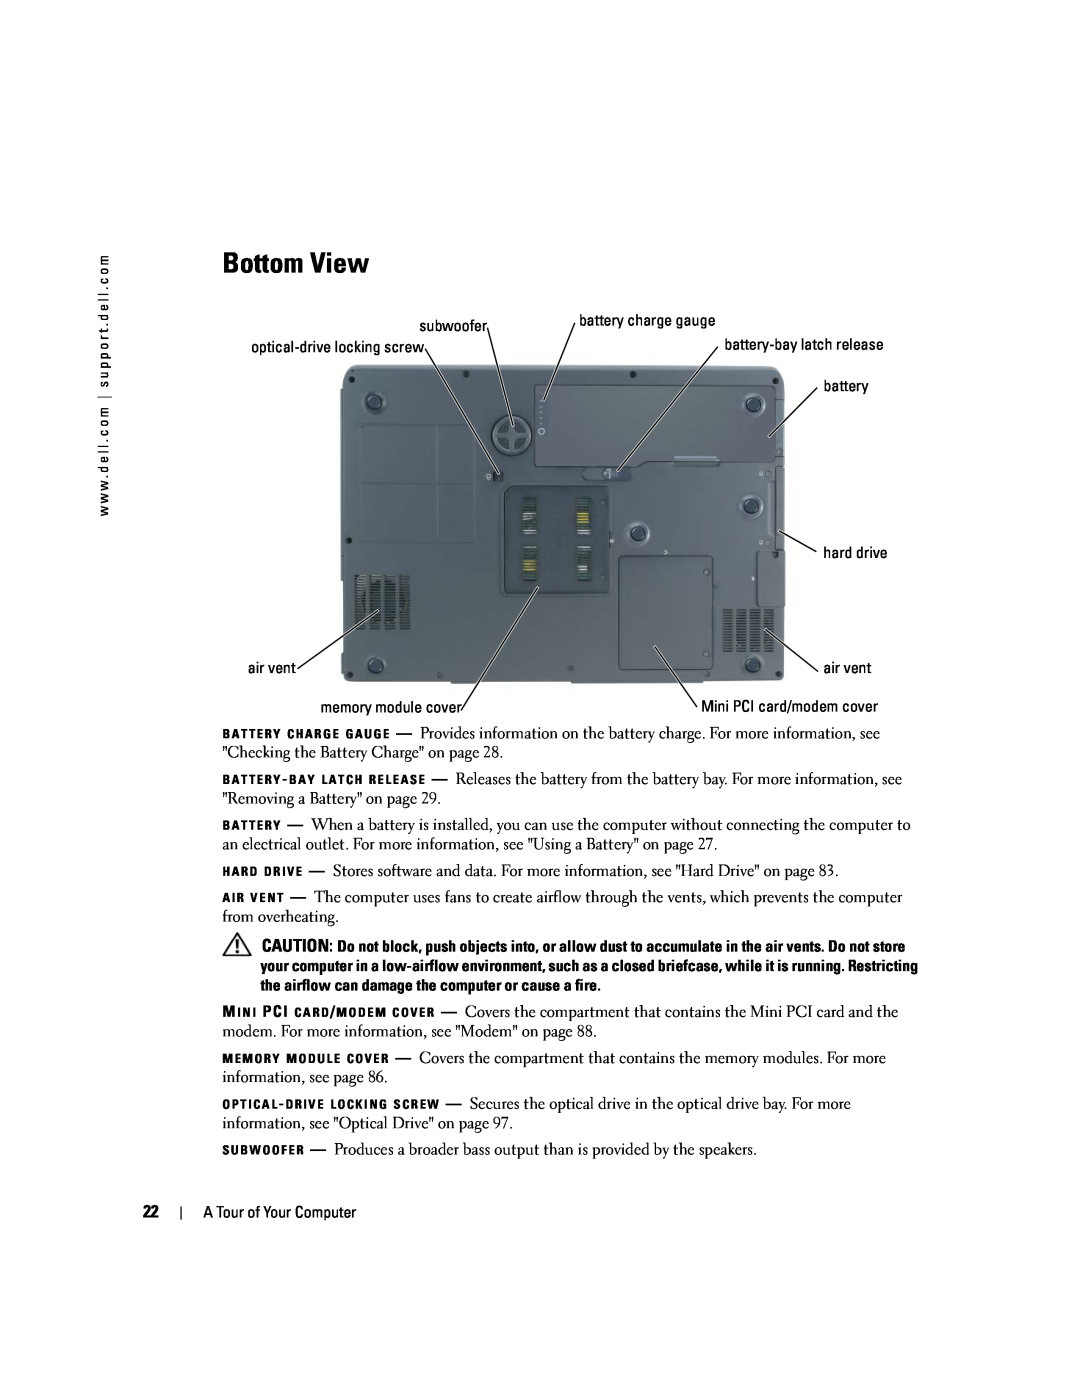 Dell 9300 owner manual Bottom View 